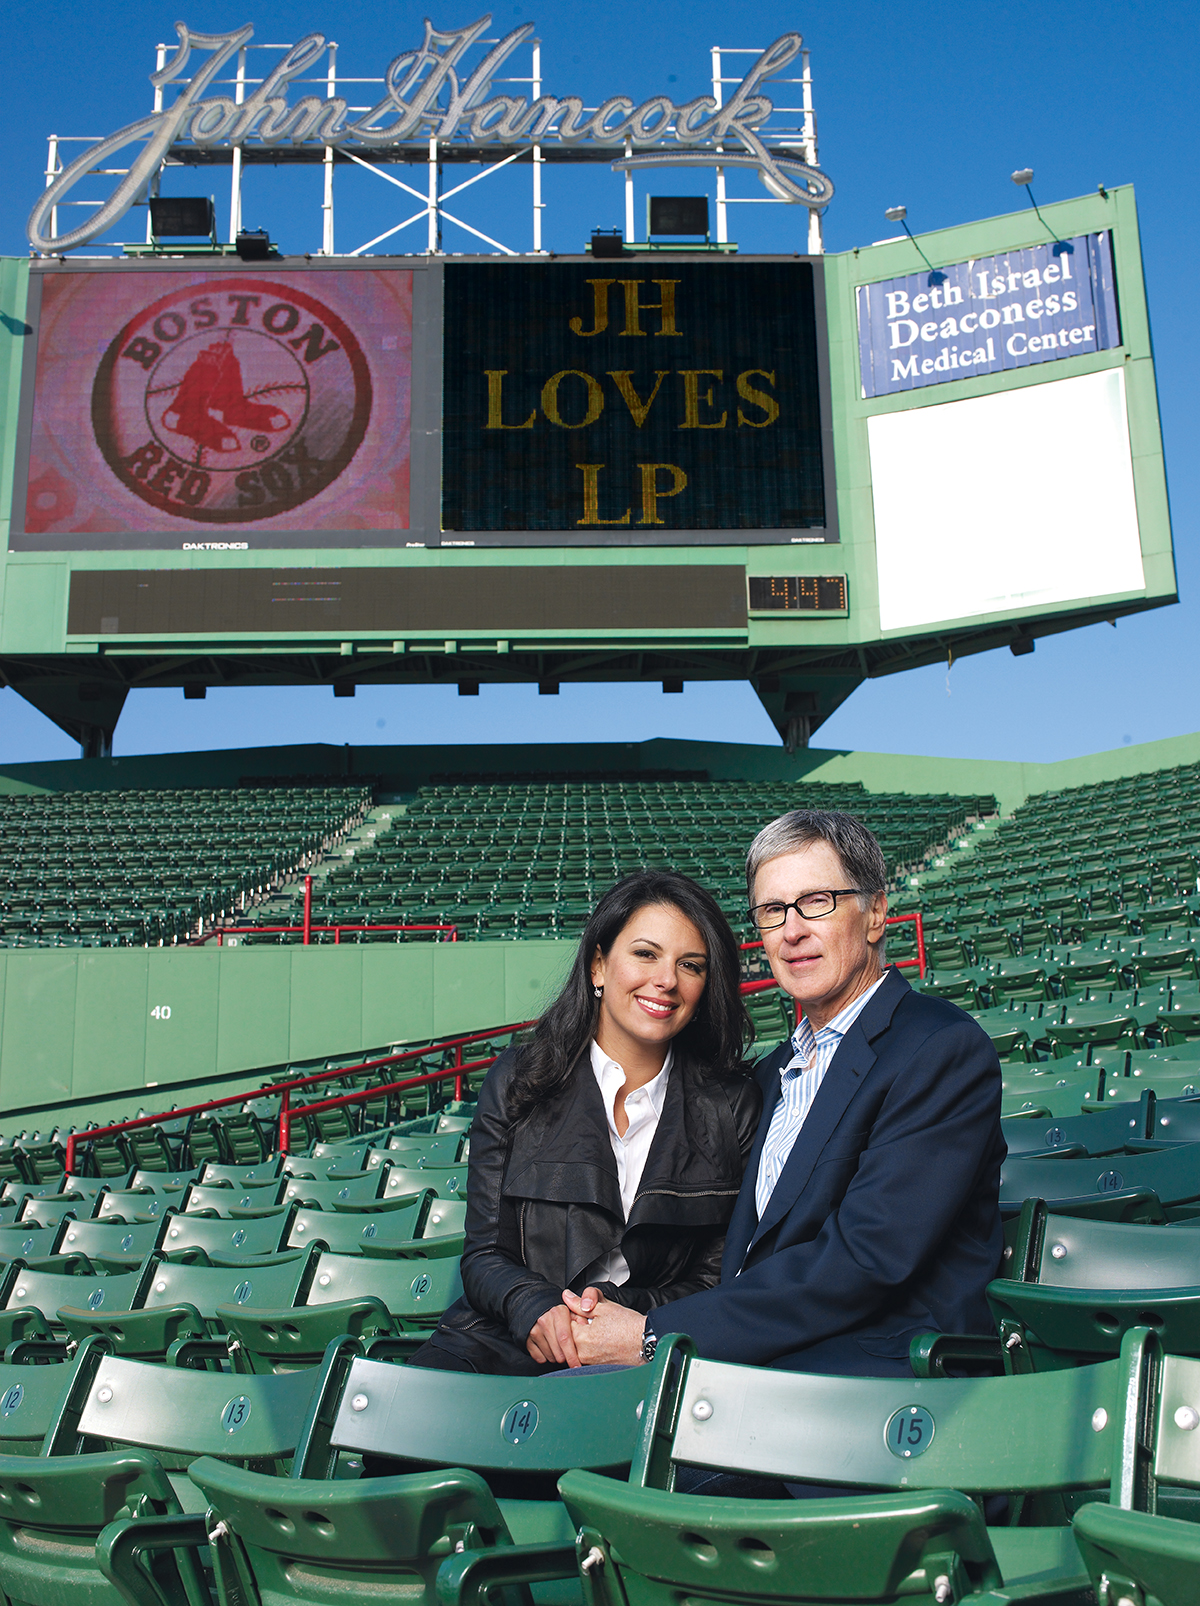 Linda Pizzuti Henry now has ownership stake in Red Sox – Boston Herald